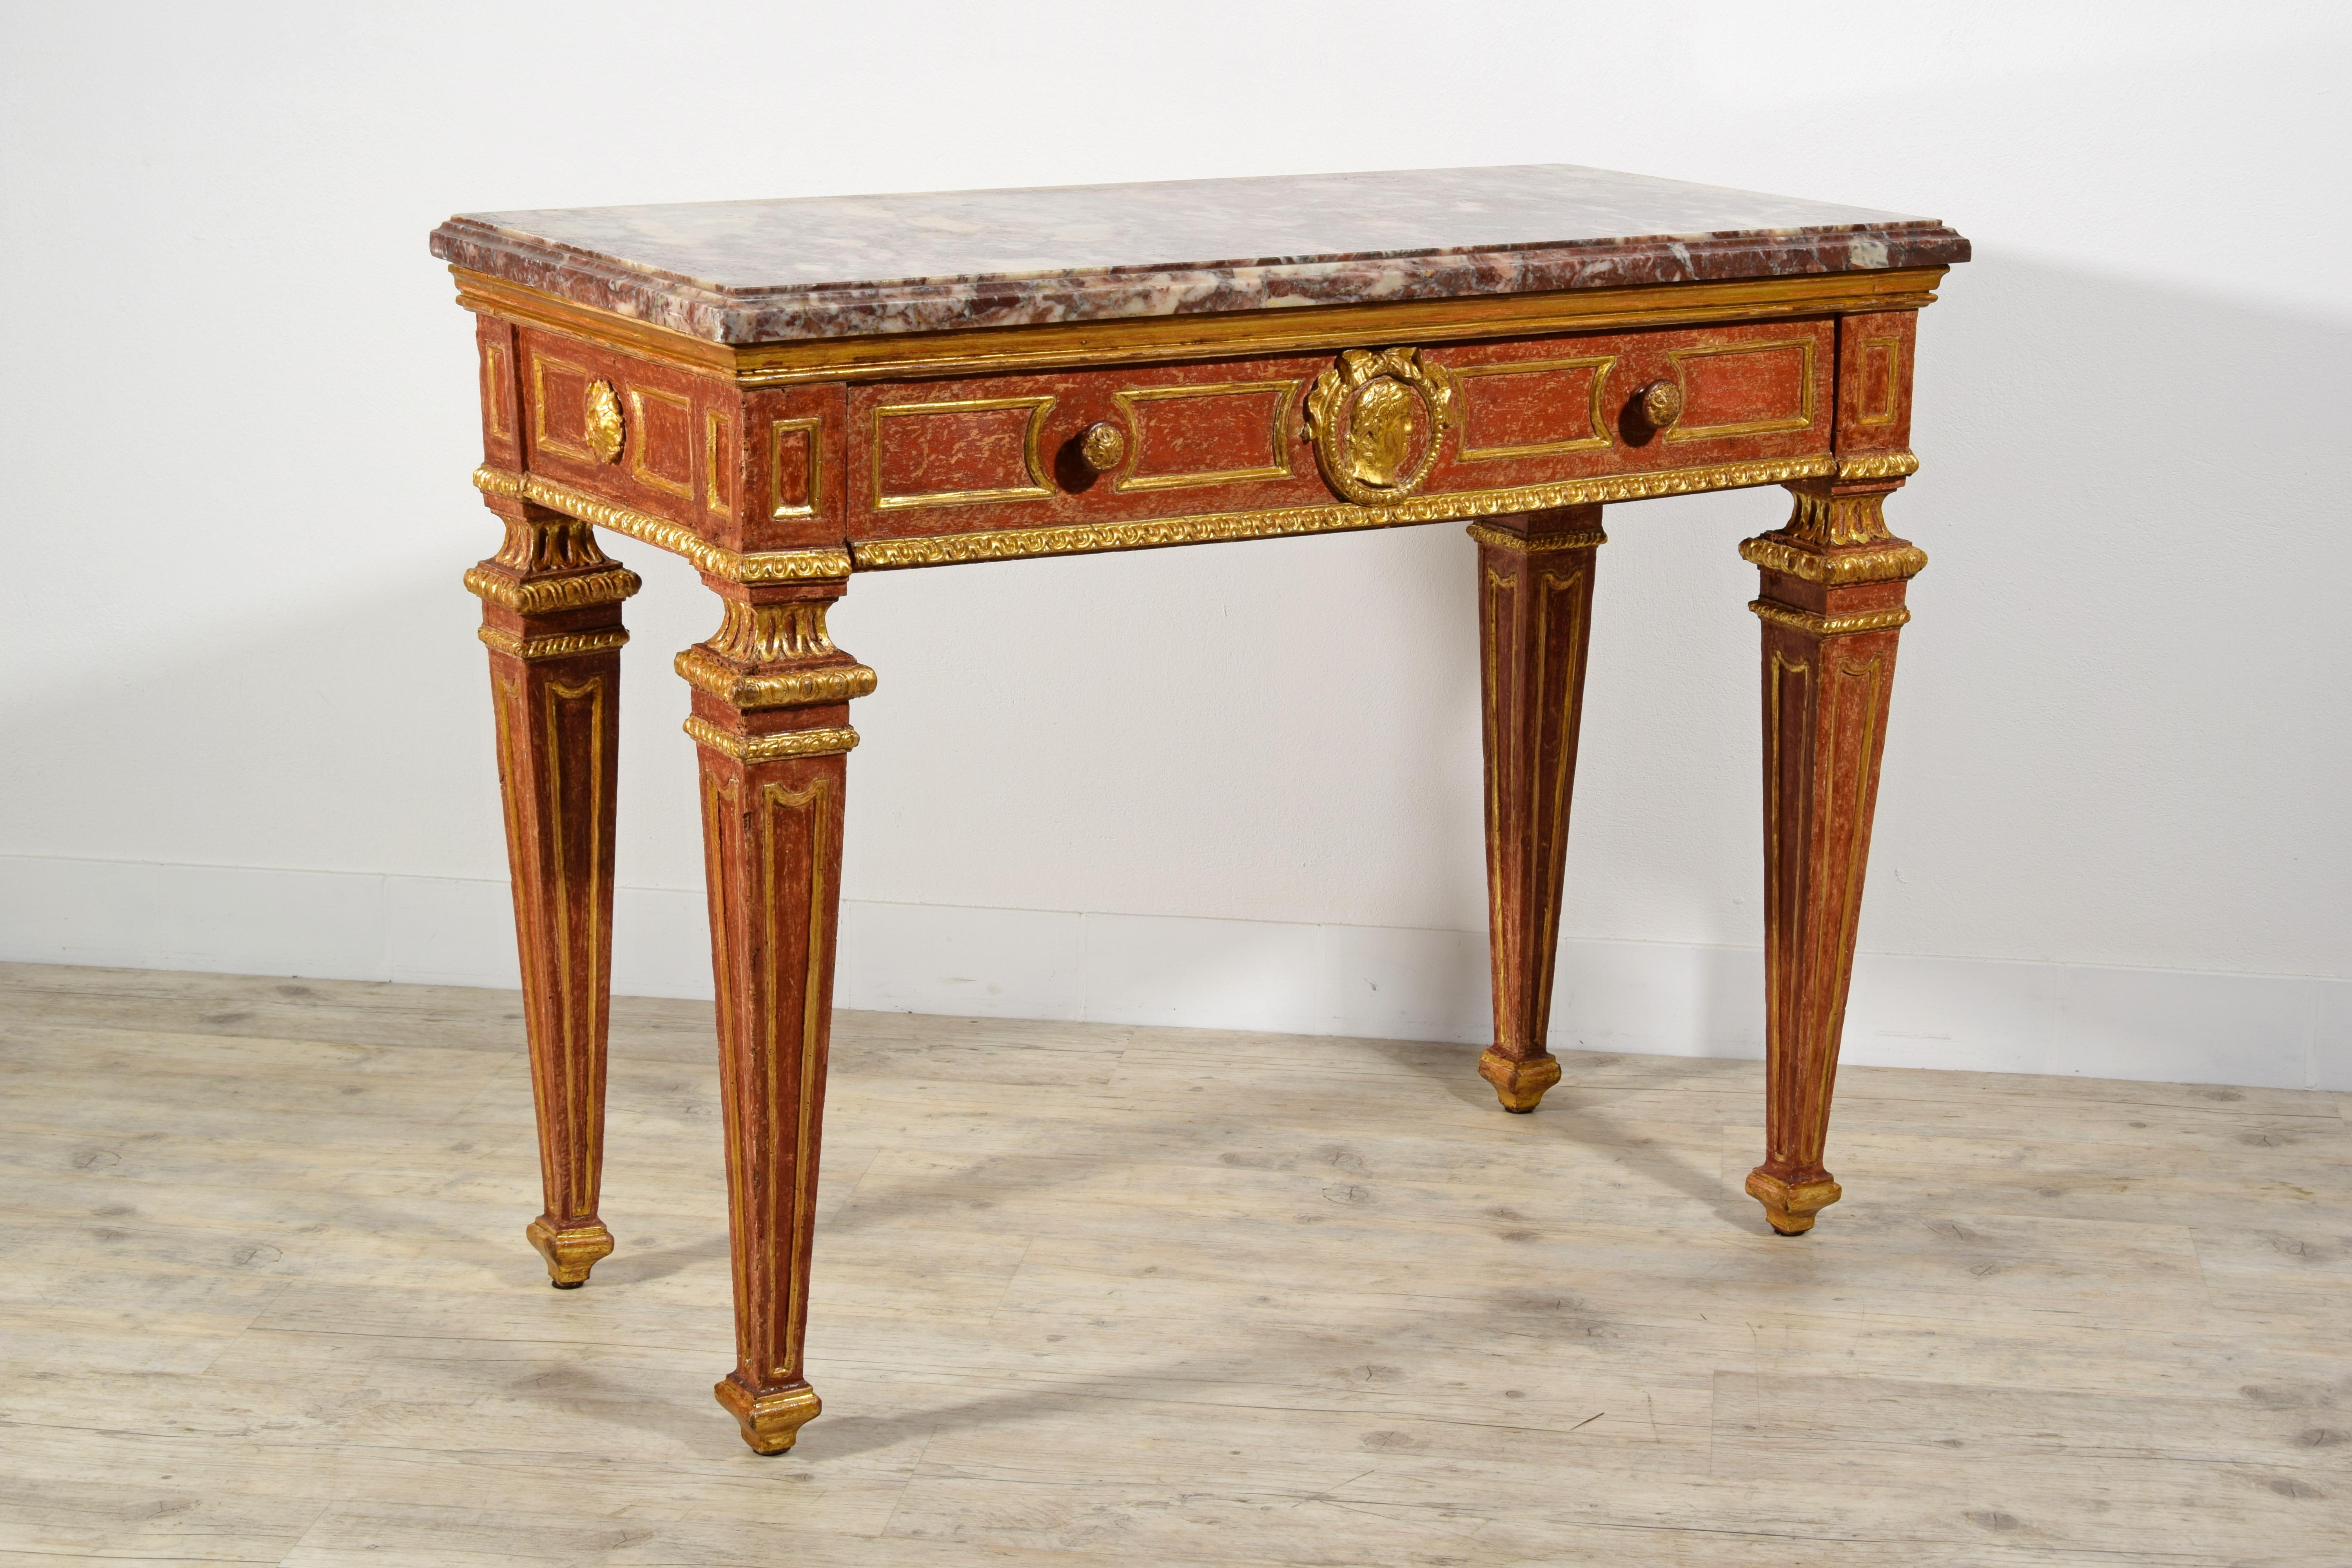 18th Century, Italian Neoclassical Gilded and Red Lacquered Wood with Marble Top For Sale 17